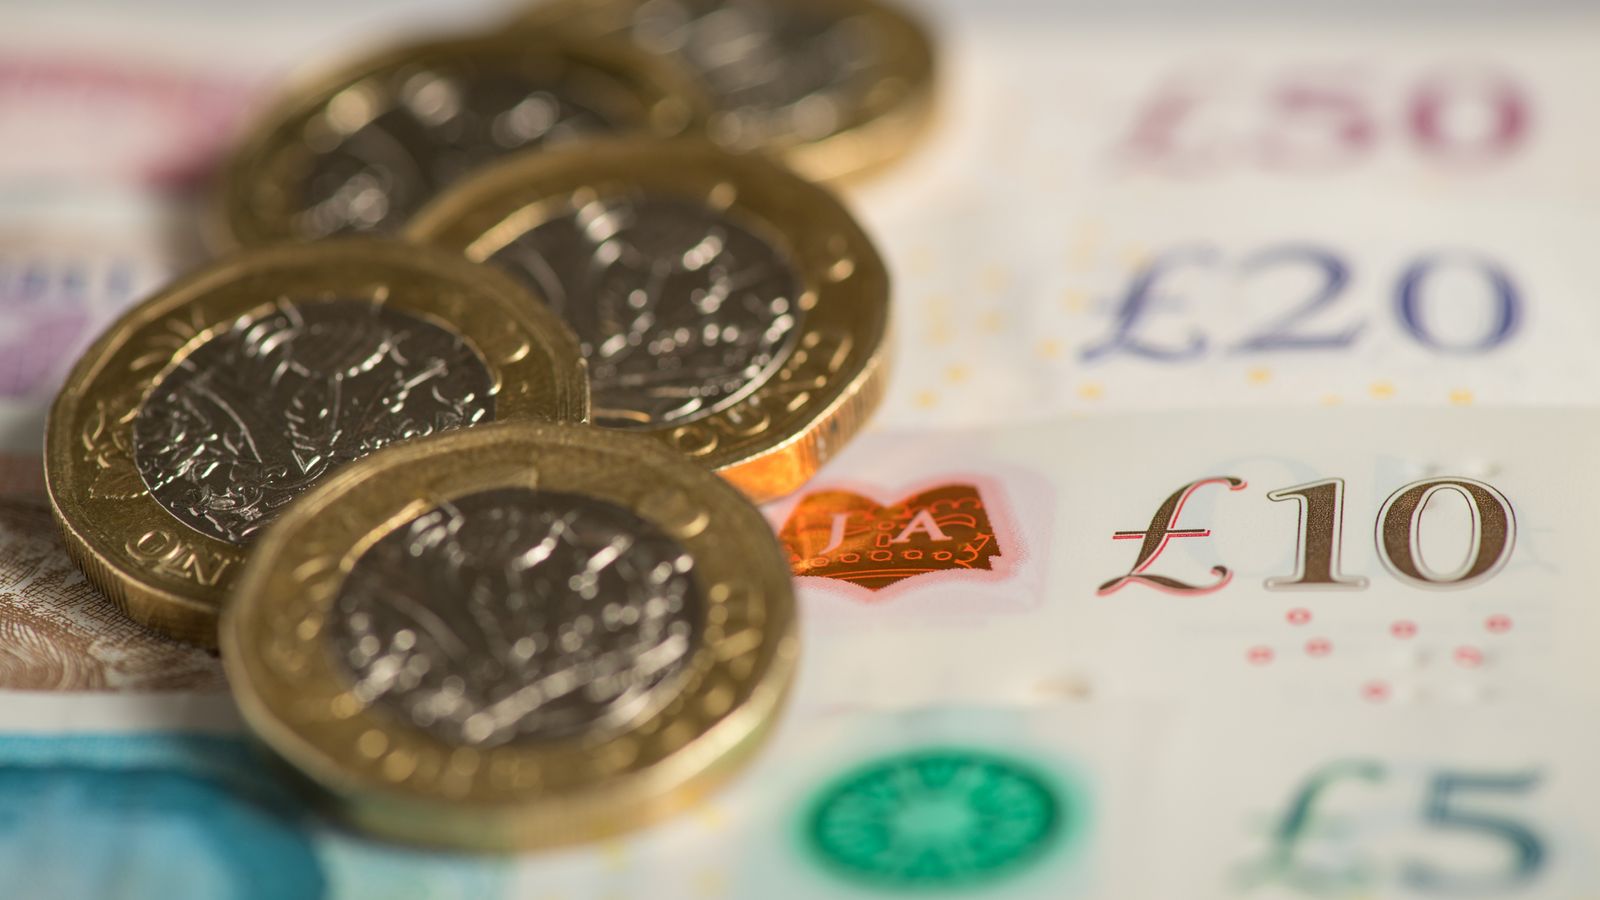 More than 6m people with disabilities to start receiving £150 cost of living payment